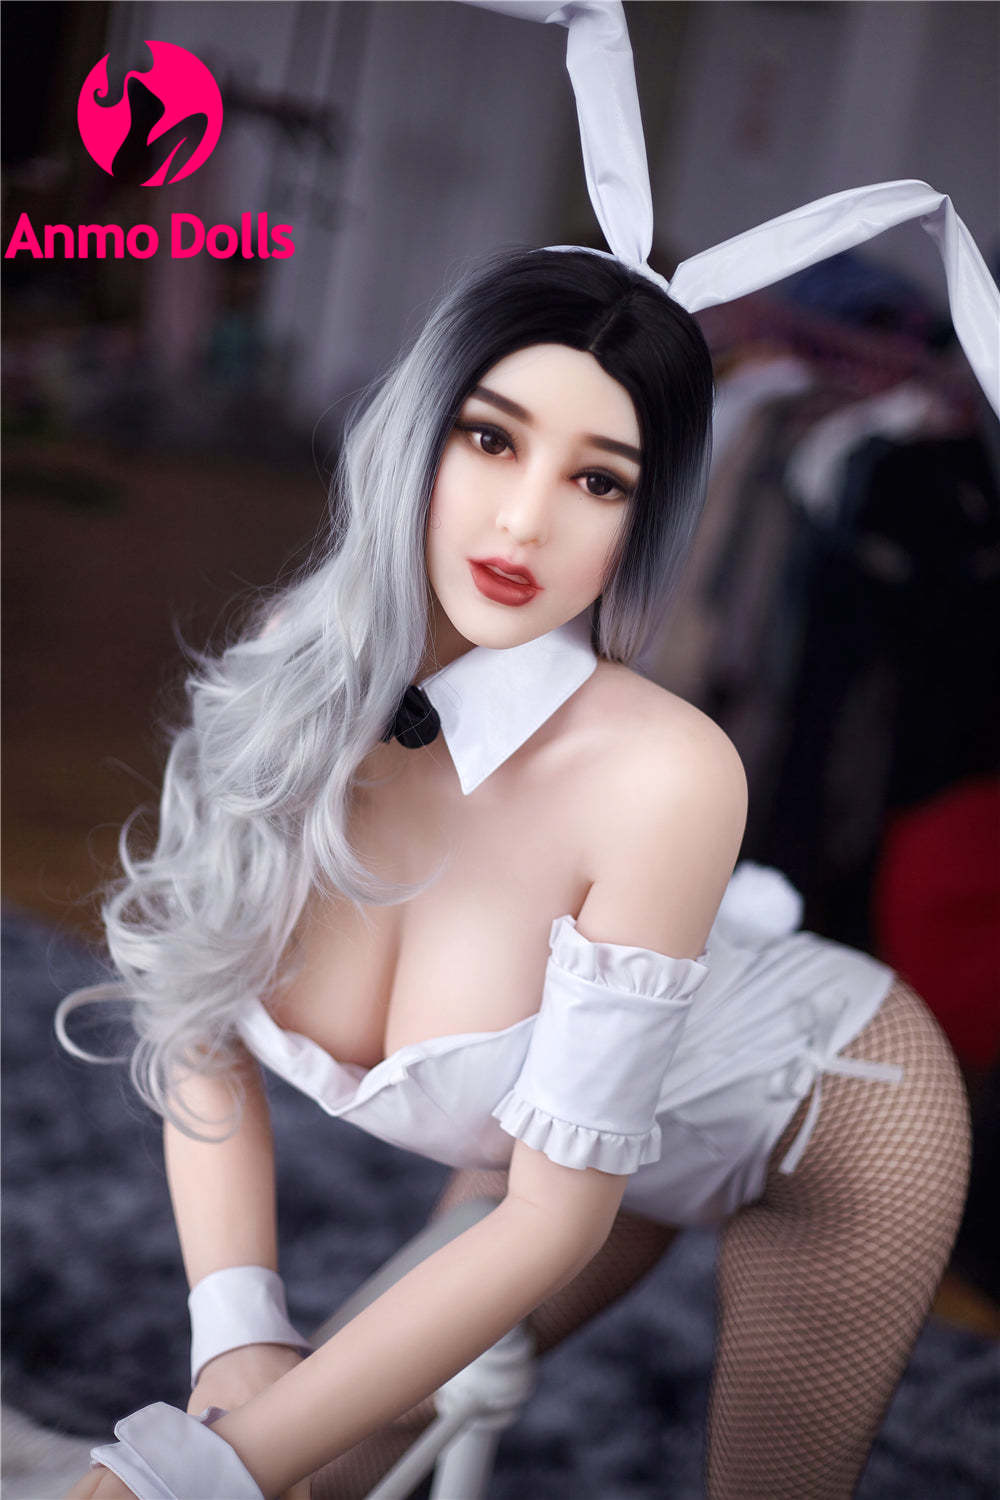 Myrtle - Lovely Asian Sex Doll Waiting for You by Anmodolls